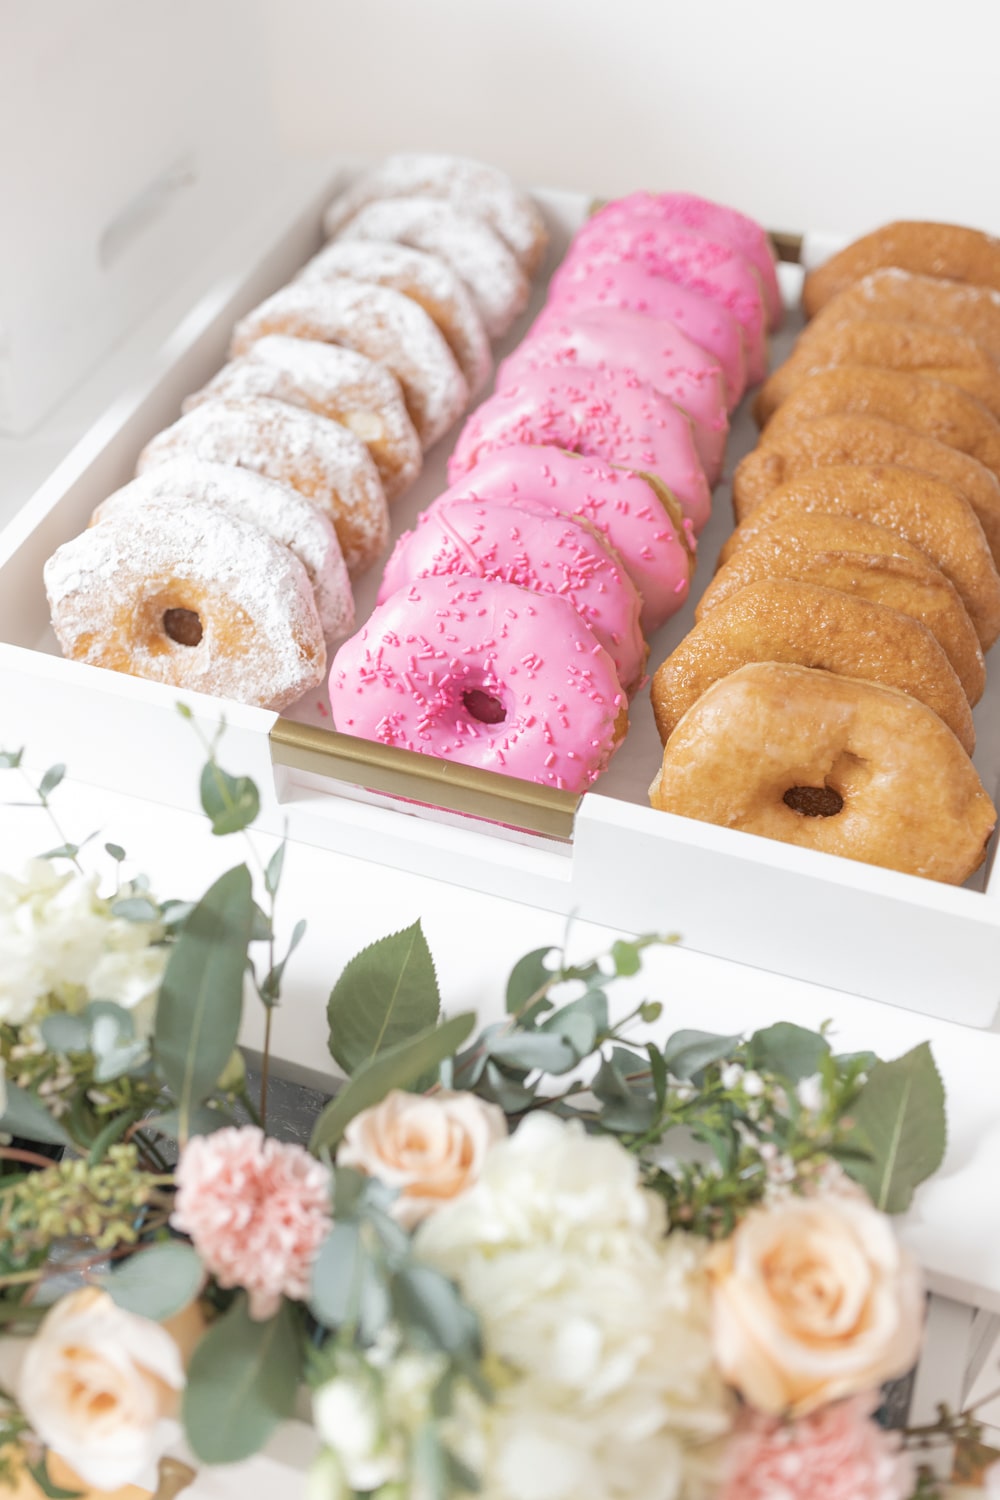 Powdered, glazed, and pink frosted donuts from Hy-Vee's bakery on Diary of a Debutante